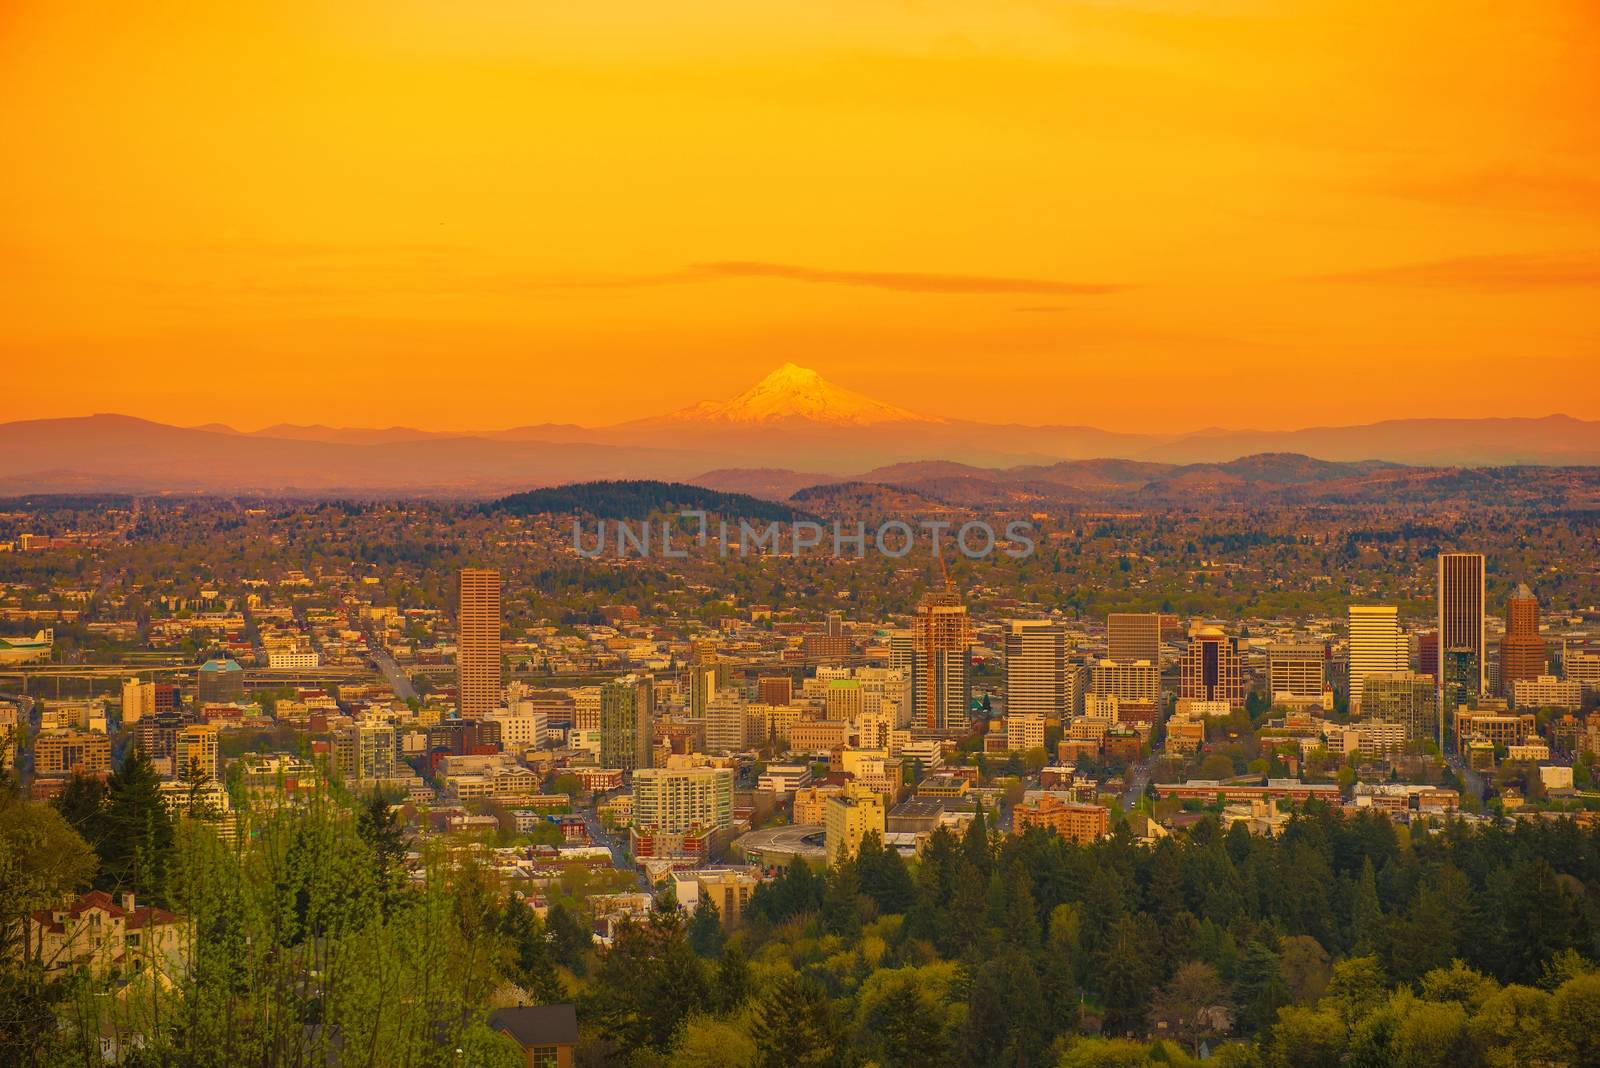 Scenic Sunset in Portland Oregon with Mount Hood on a Horizon. Portland Cityscape, United States.